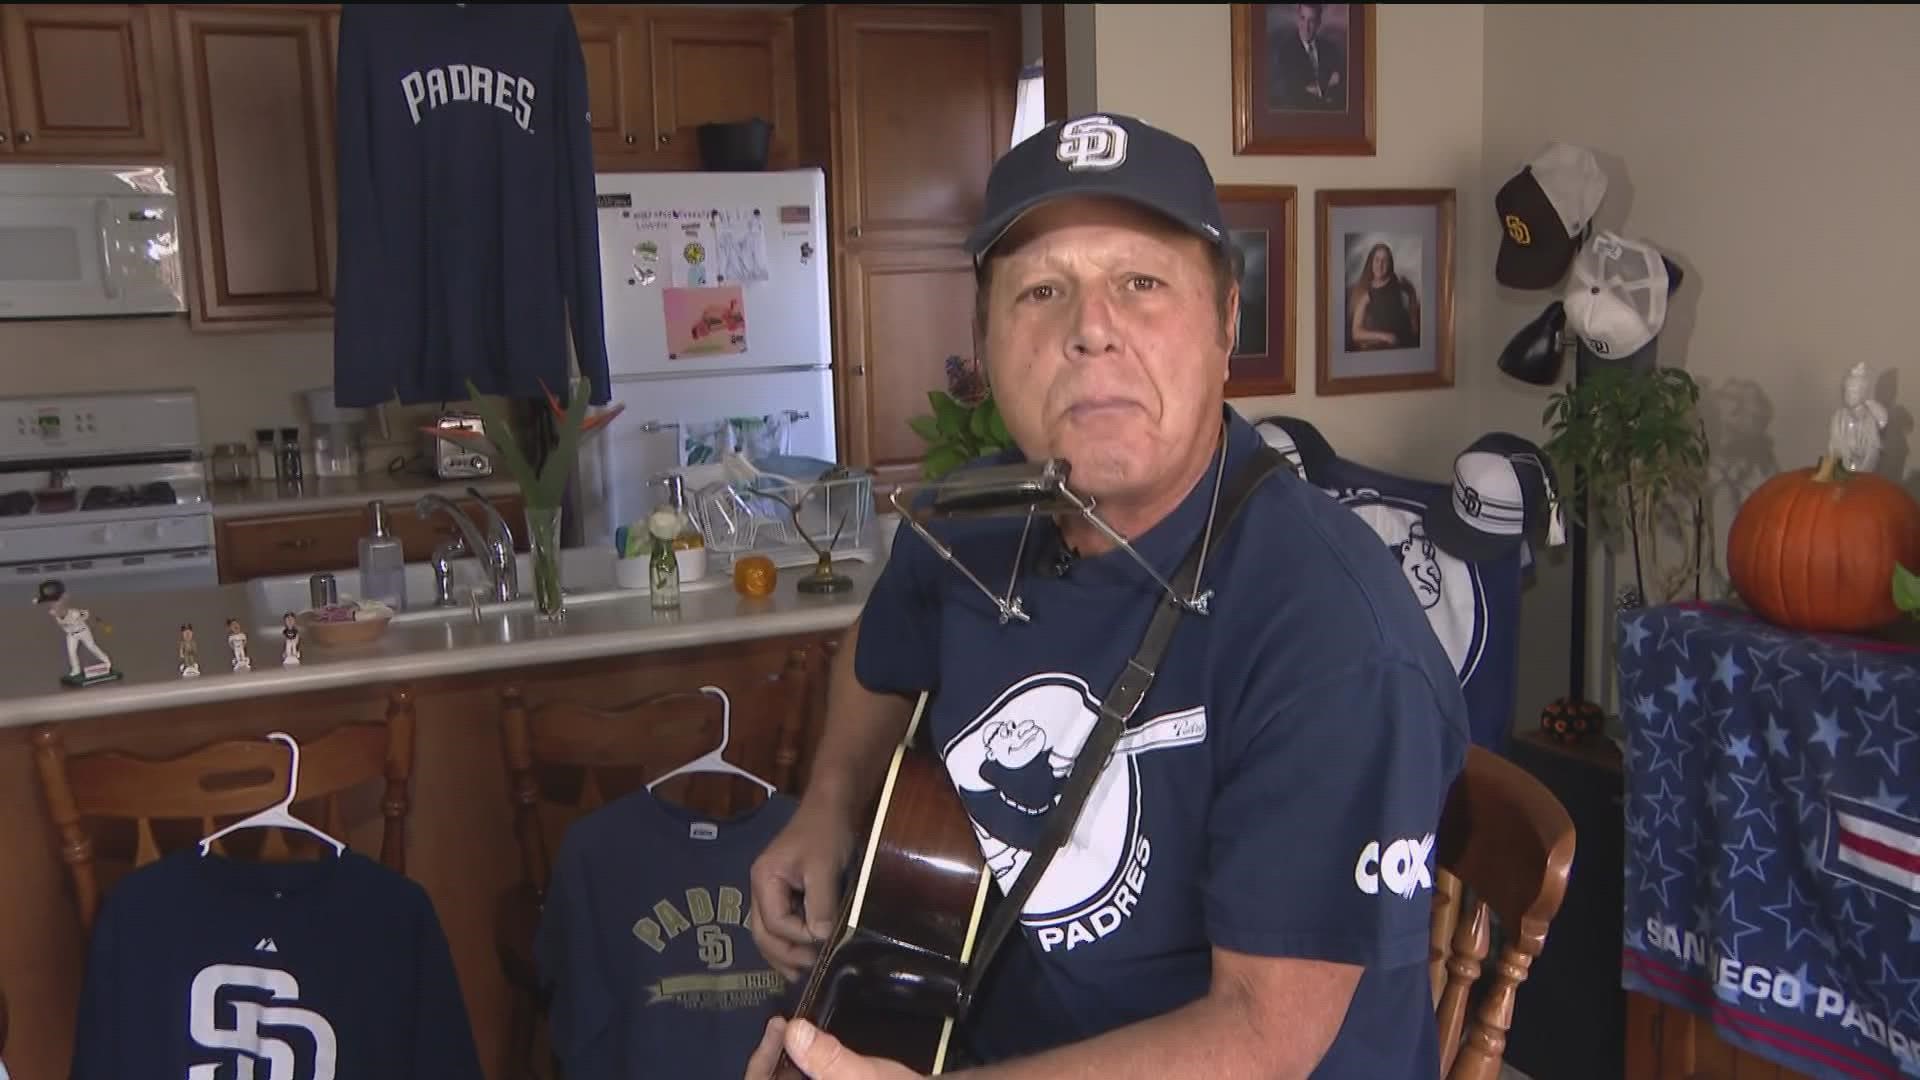 The musician will update his song to add Fernando Tatis Jr.'s name when the Padres try to win the World Series in 2023!